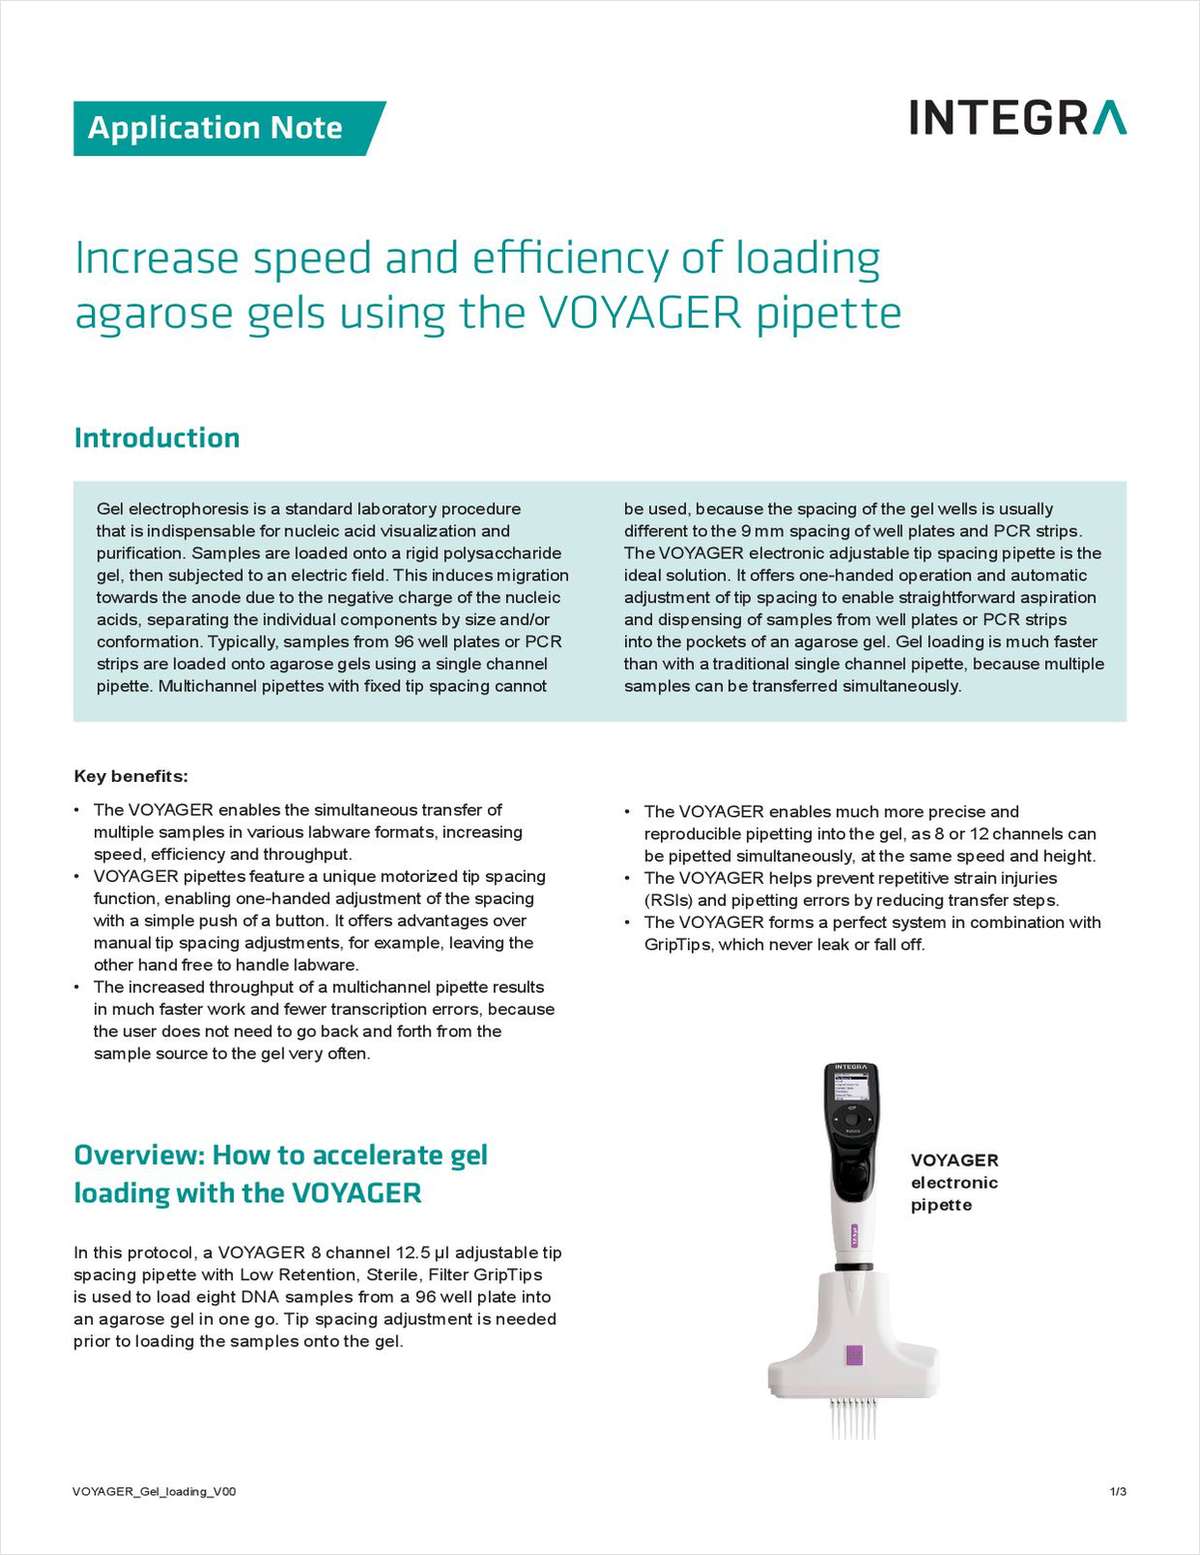 Increase Speed and Efficiency of Loading Agarose Gels Using the Voyager Pipette